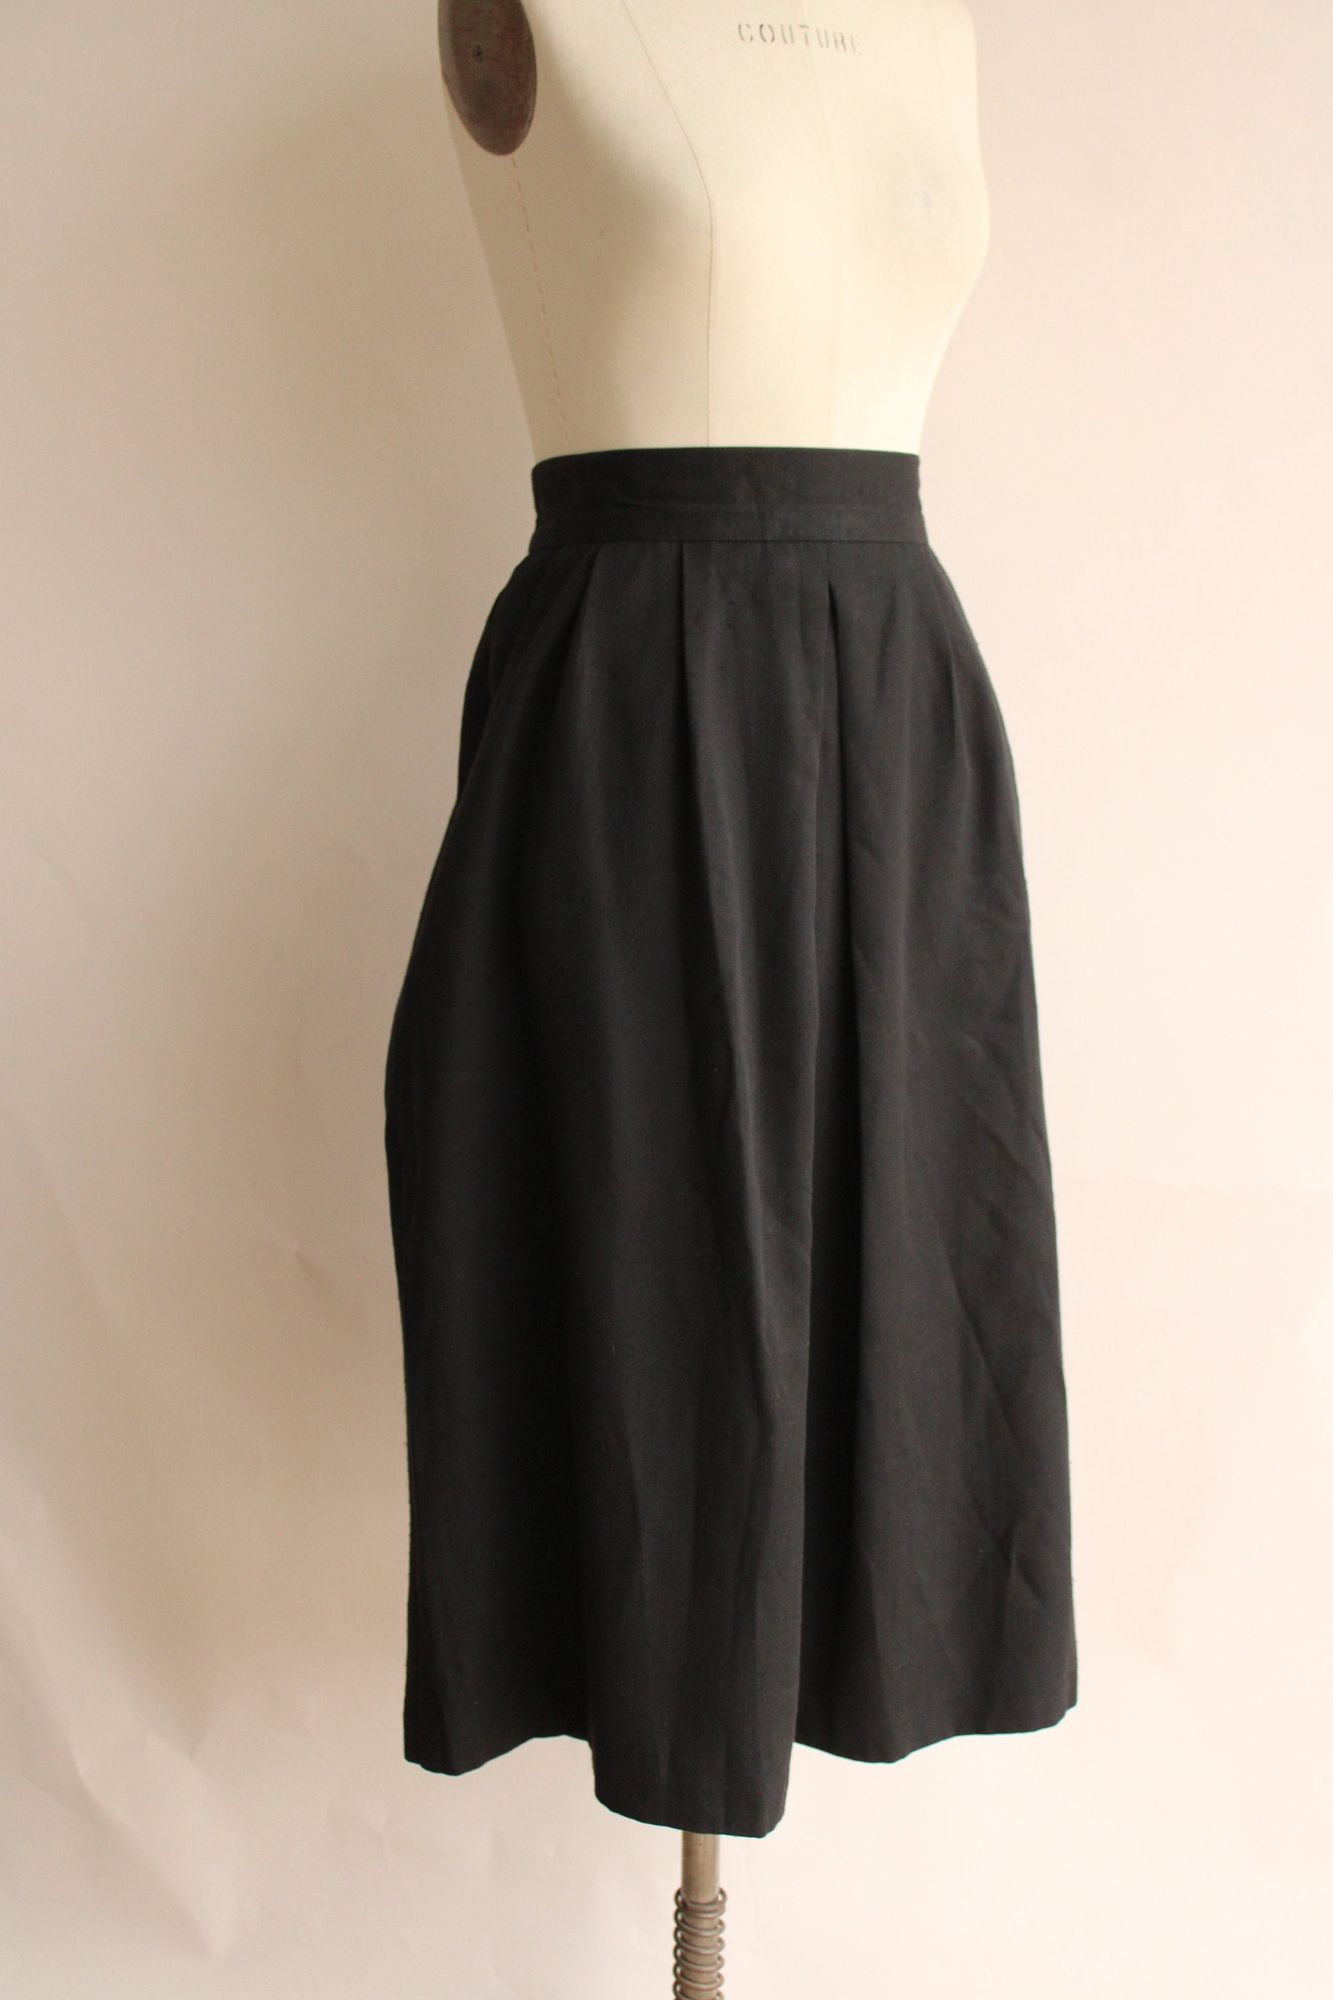 Vintage 1990s Black Pleated A Line Skirt with Pockets